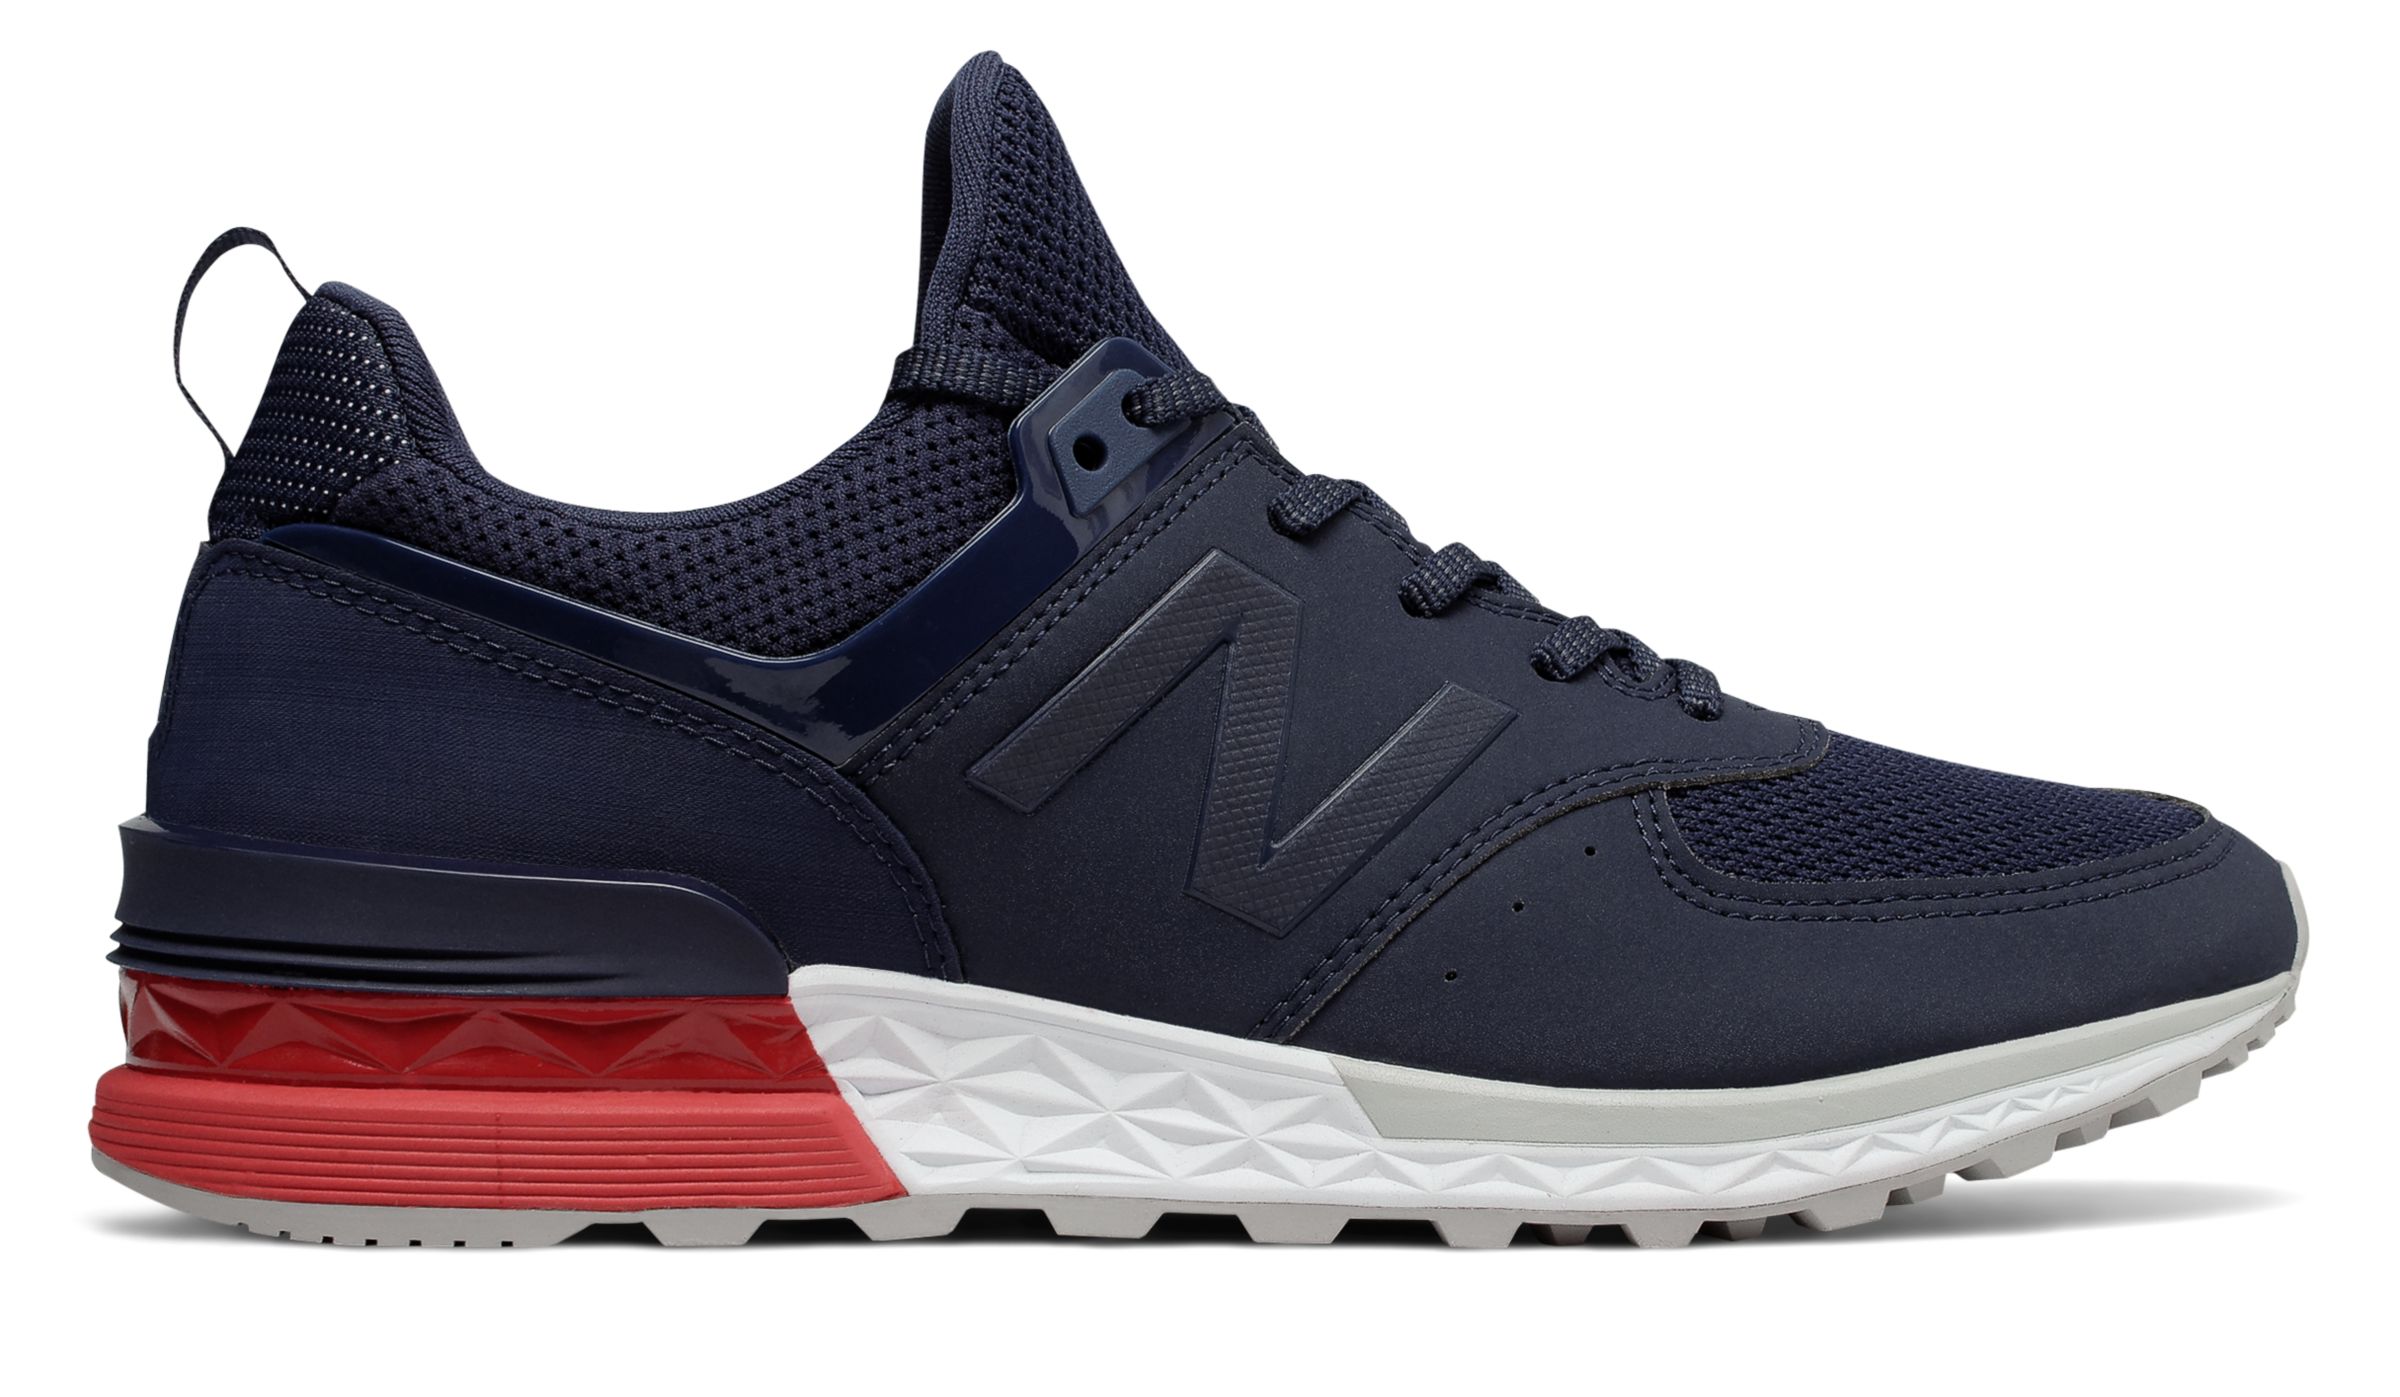 New Balance MS574-V2SP on Sale - Discounts Up to 53% Off on MS574SCO at  Joe's New Balance Outlet